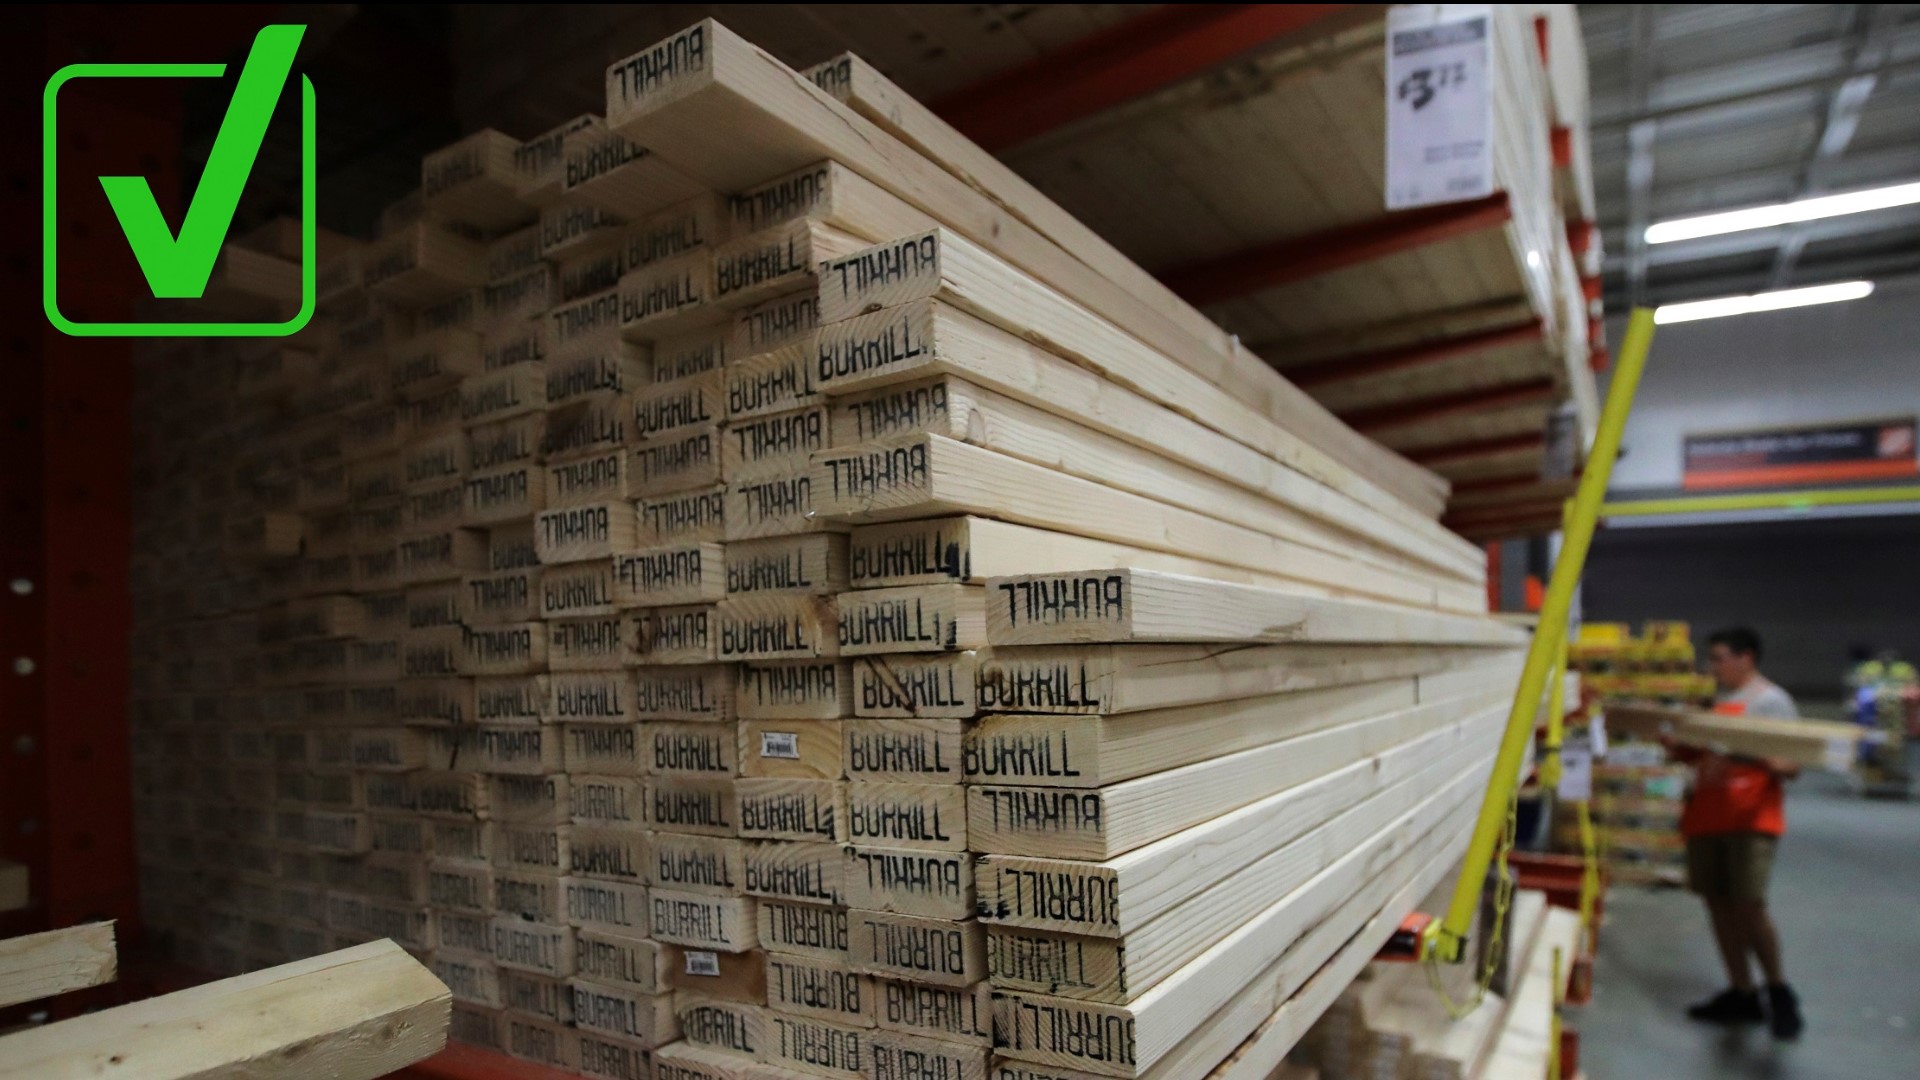 Videos shared on TikTok recently claim the lumber shortage was created to boost profits in the lumber industry.